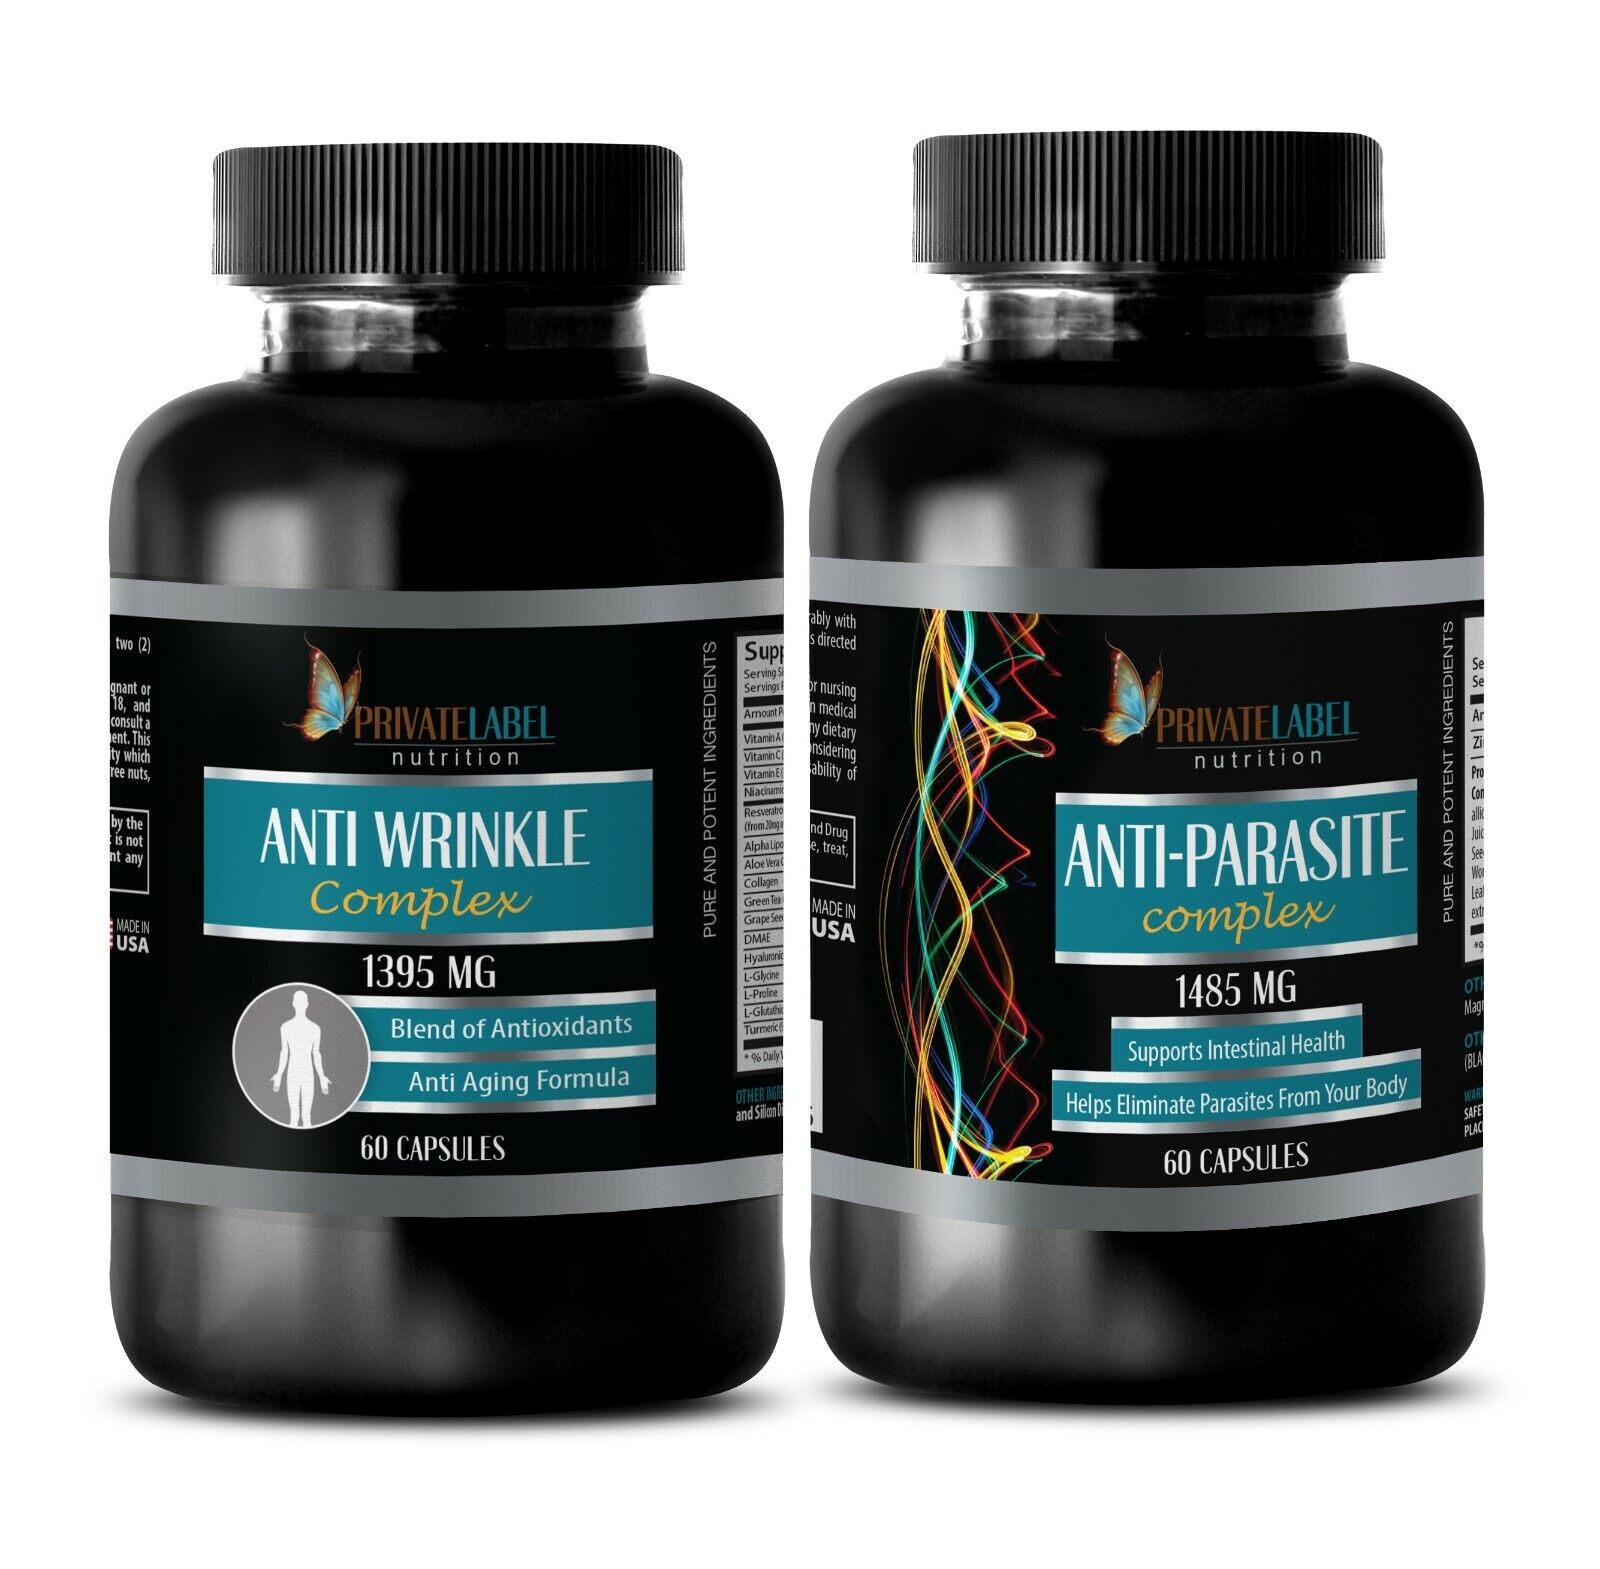 Candida overgrowth supplements - ANTI PARASITE In stock CO – Max 60% OFF WRINKLE